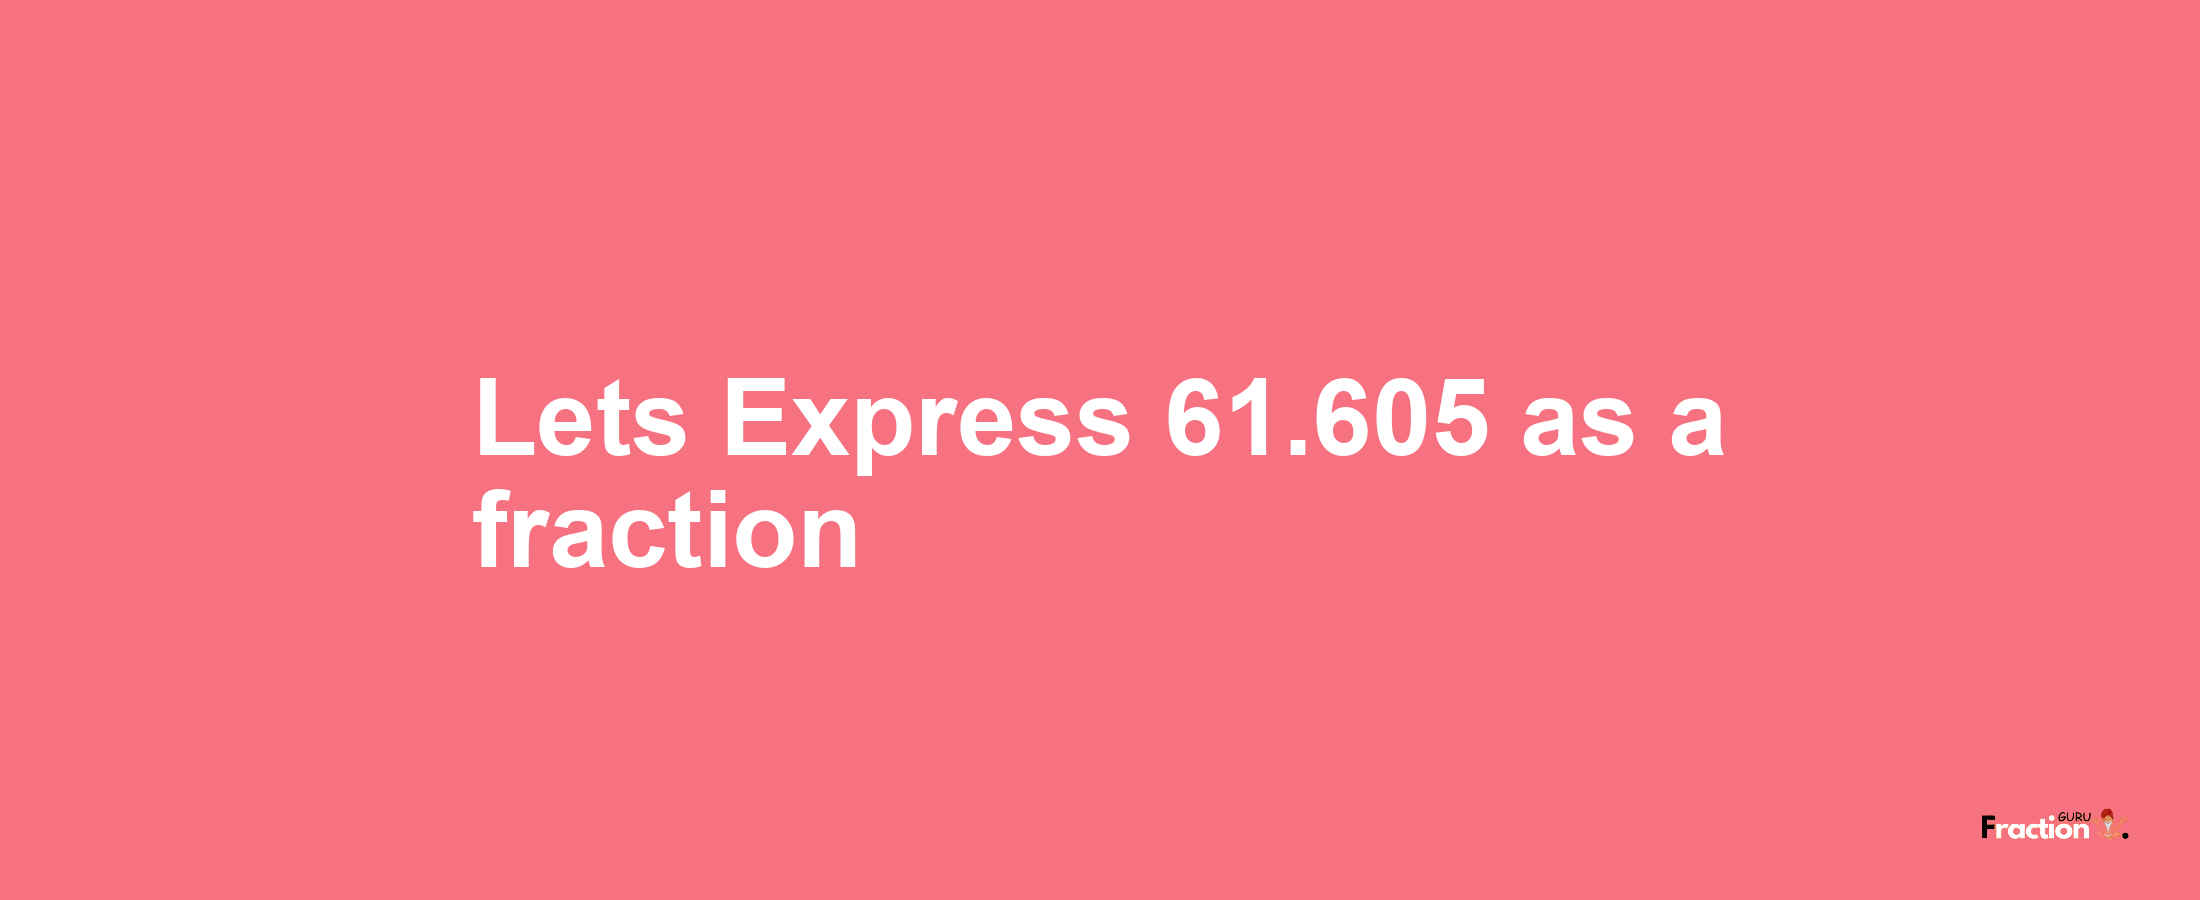 Lets Express 61.605 as afraction